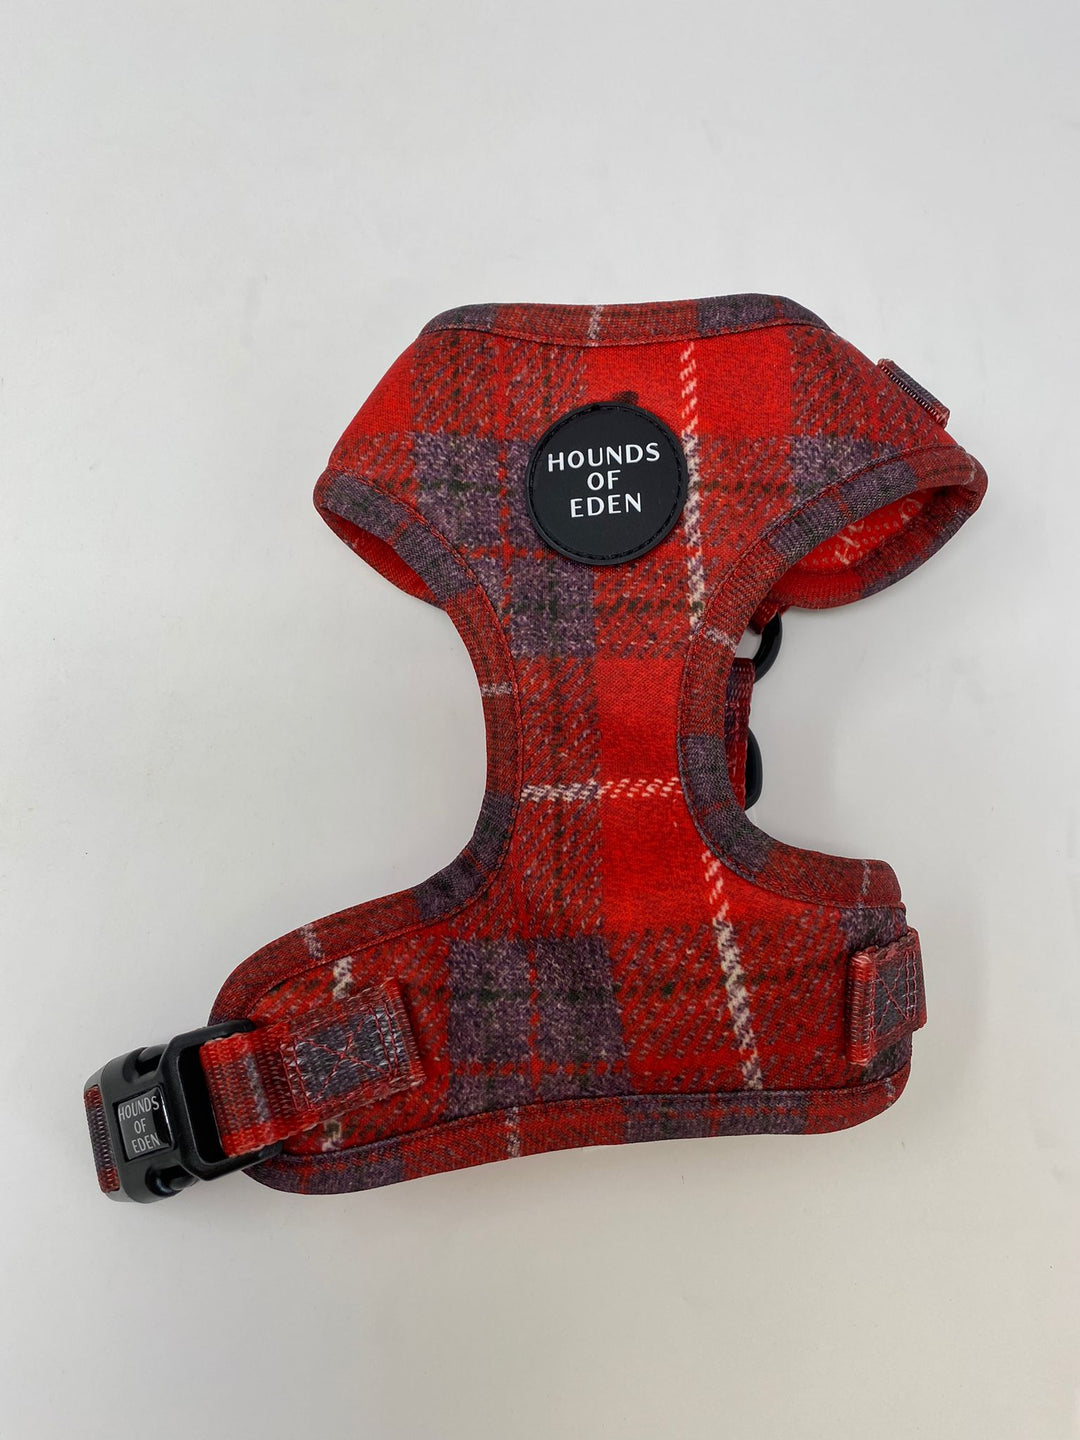 Outlet - XS 'SAMMI' - RED & GREY CHECK DOG HARNESS - 0012